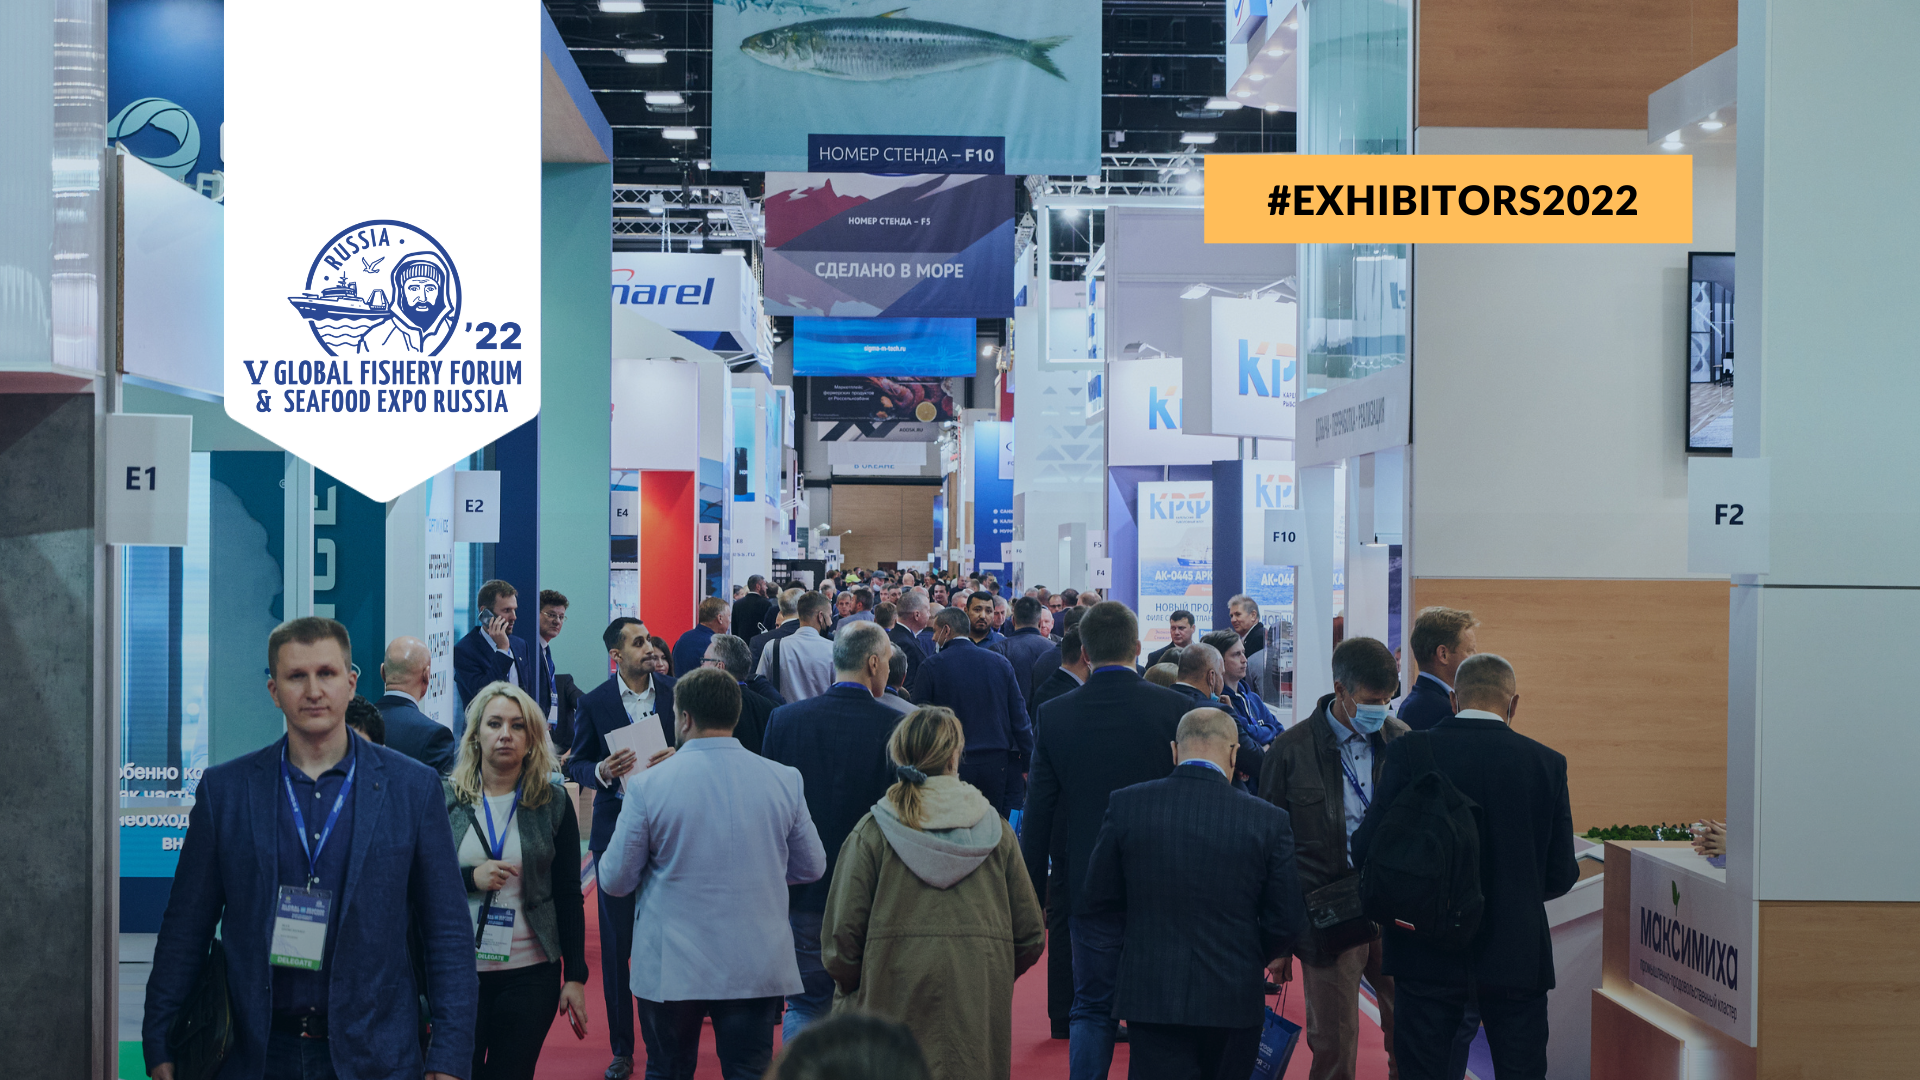 Seafood Expo Russia 2022: Overview of New Exhibitors #3